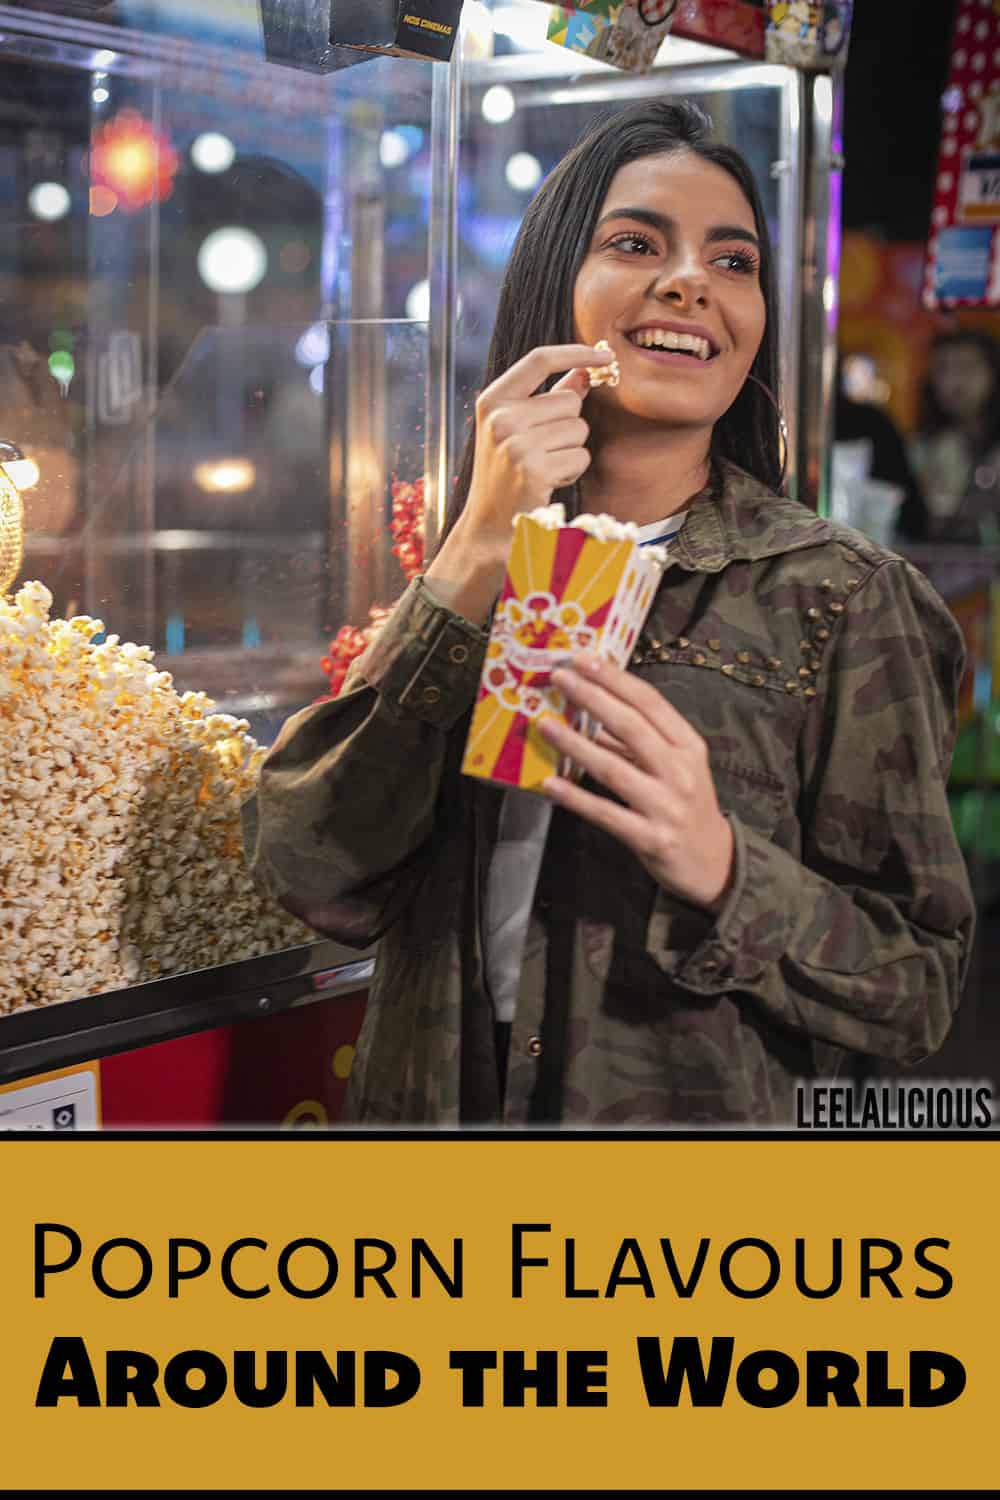 Preferred popcorn flavors by country